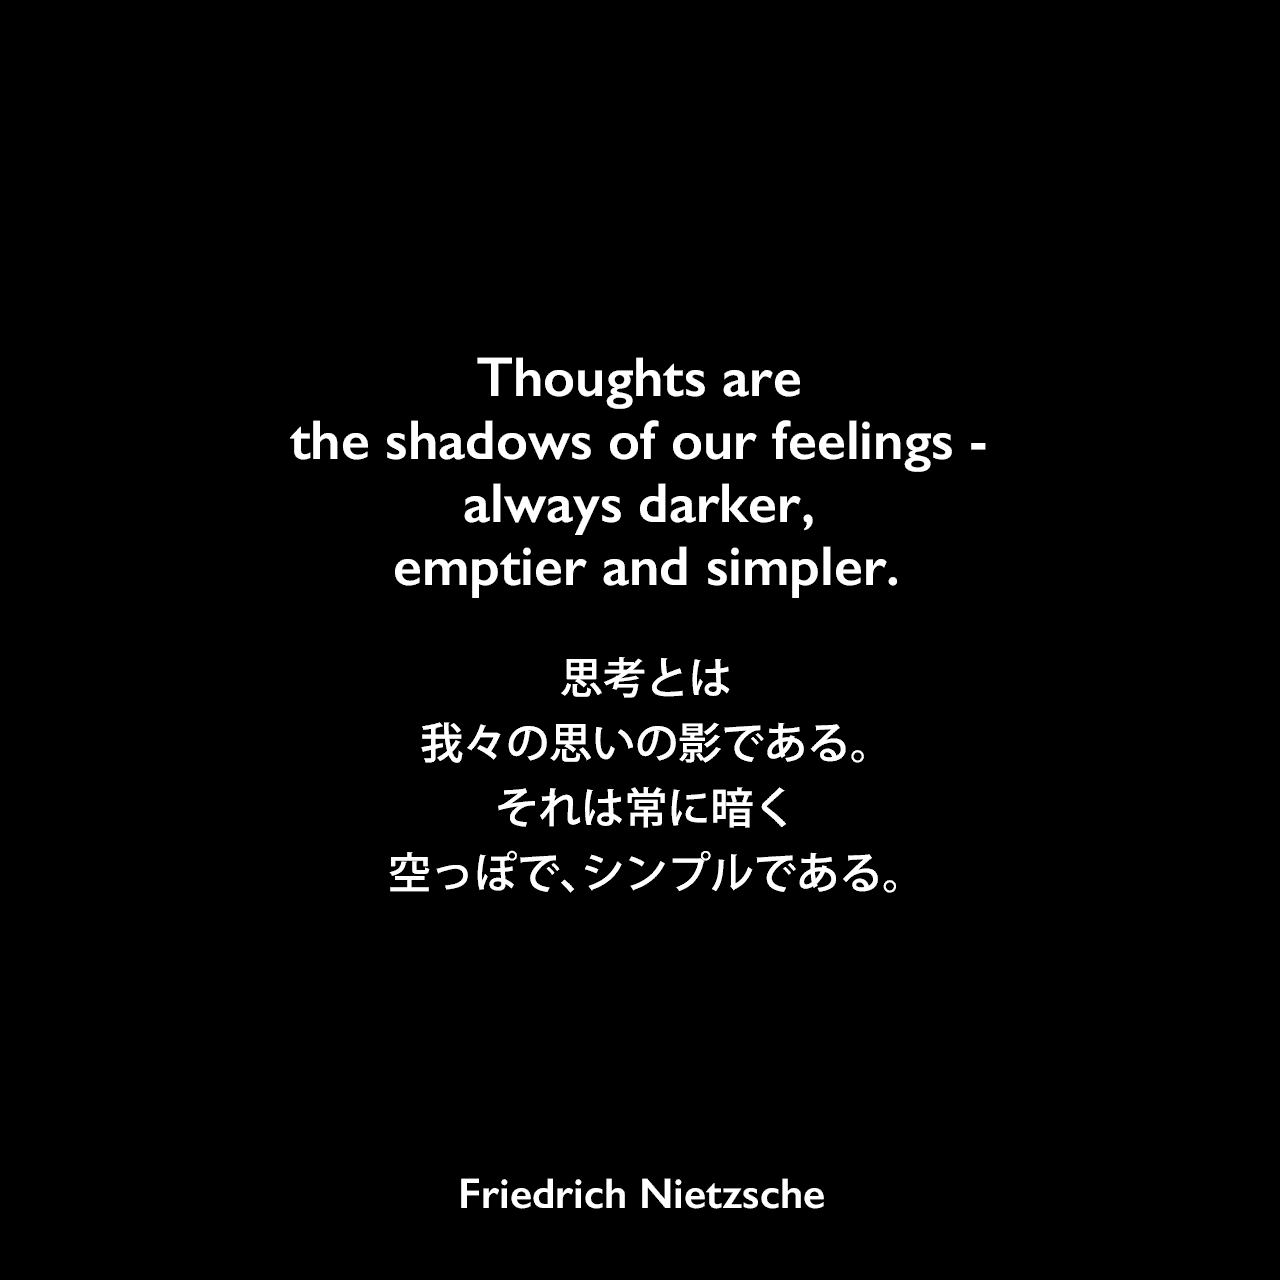 Thoughts are the shadows of our feelings - always darker, emptier and simpler.思考とは、我々の思いの影である。それは常に暗く、空っぽで、シンプルである。Friedrich Nietzsche